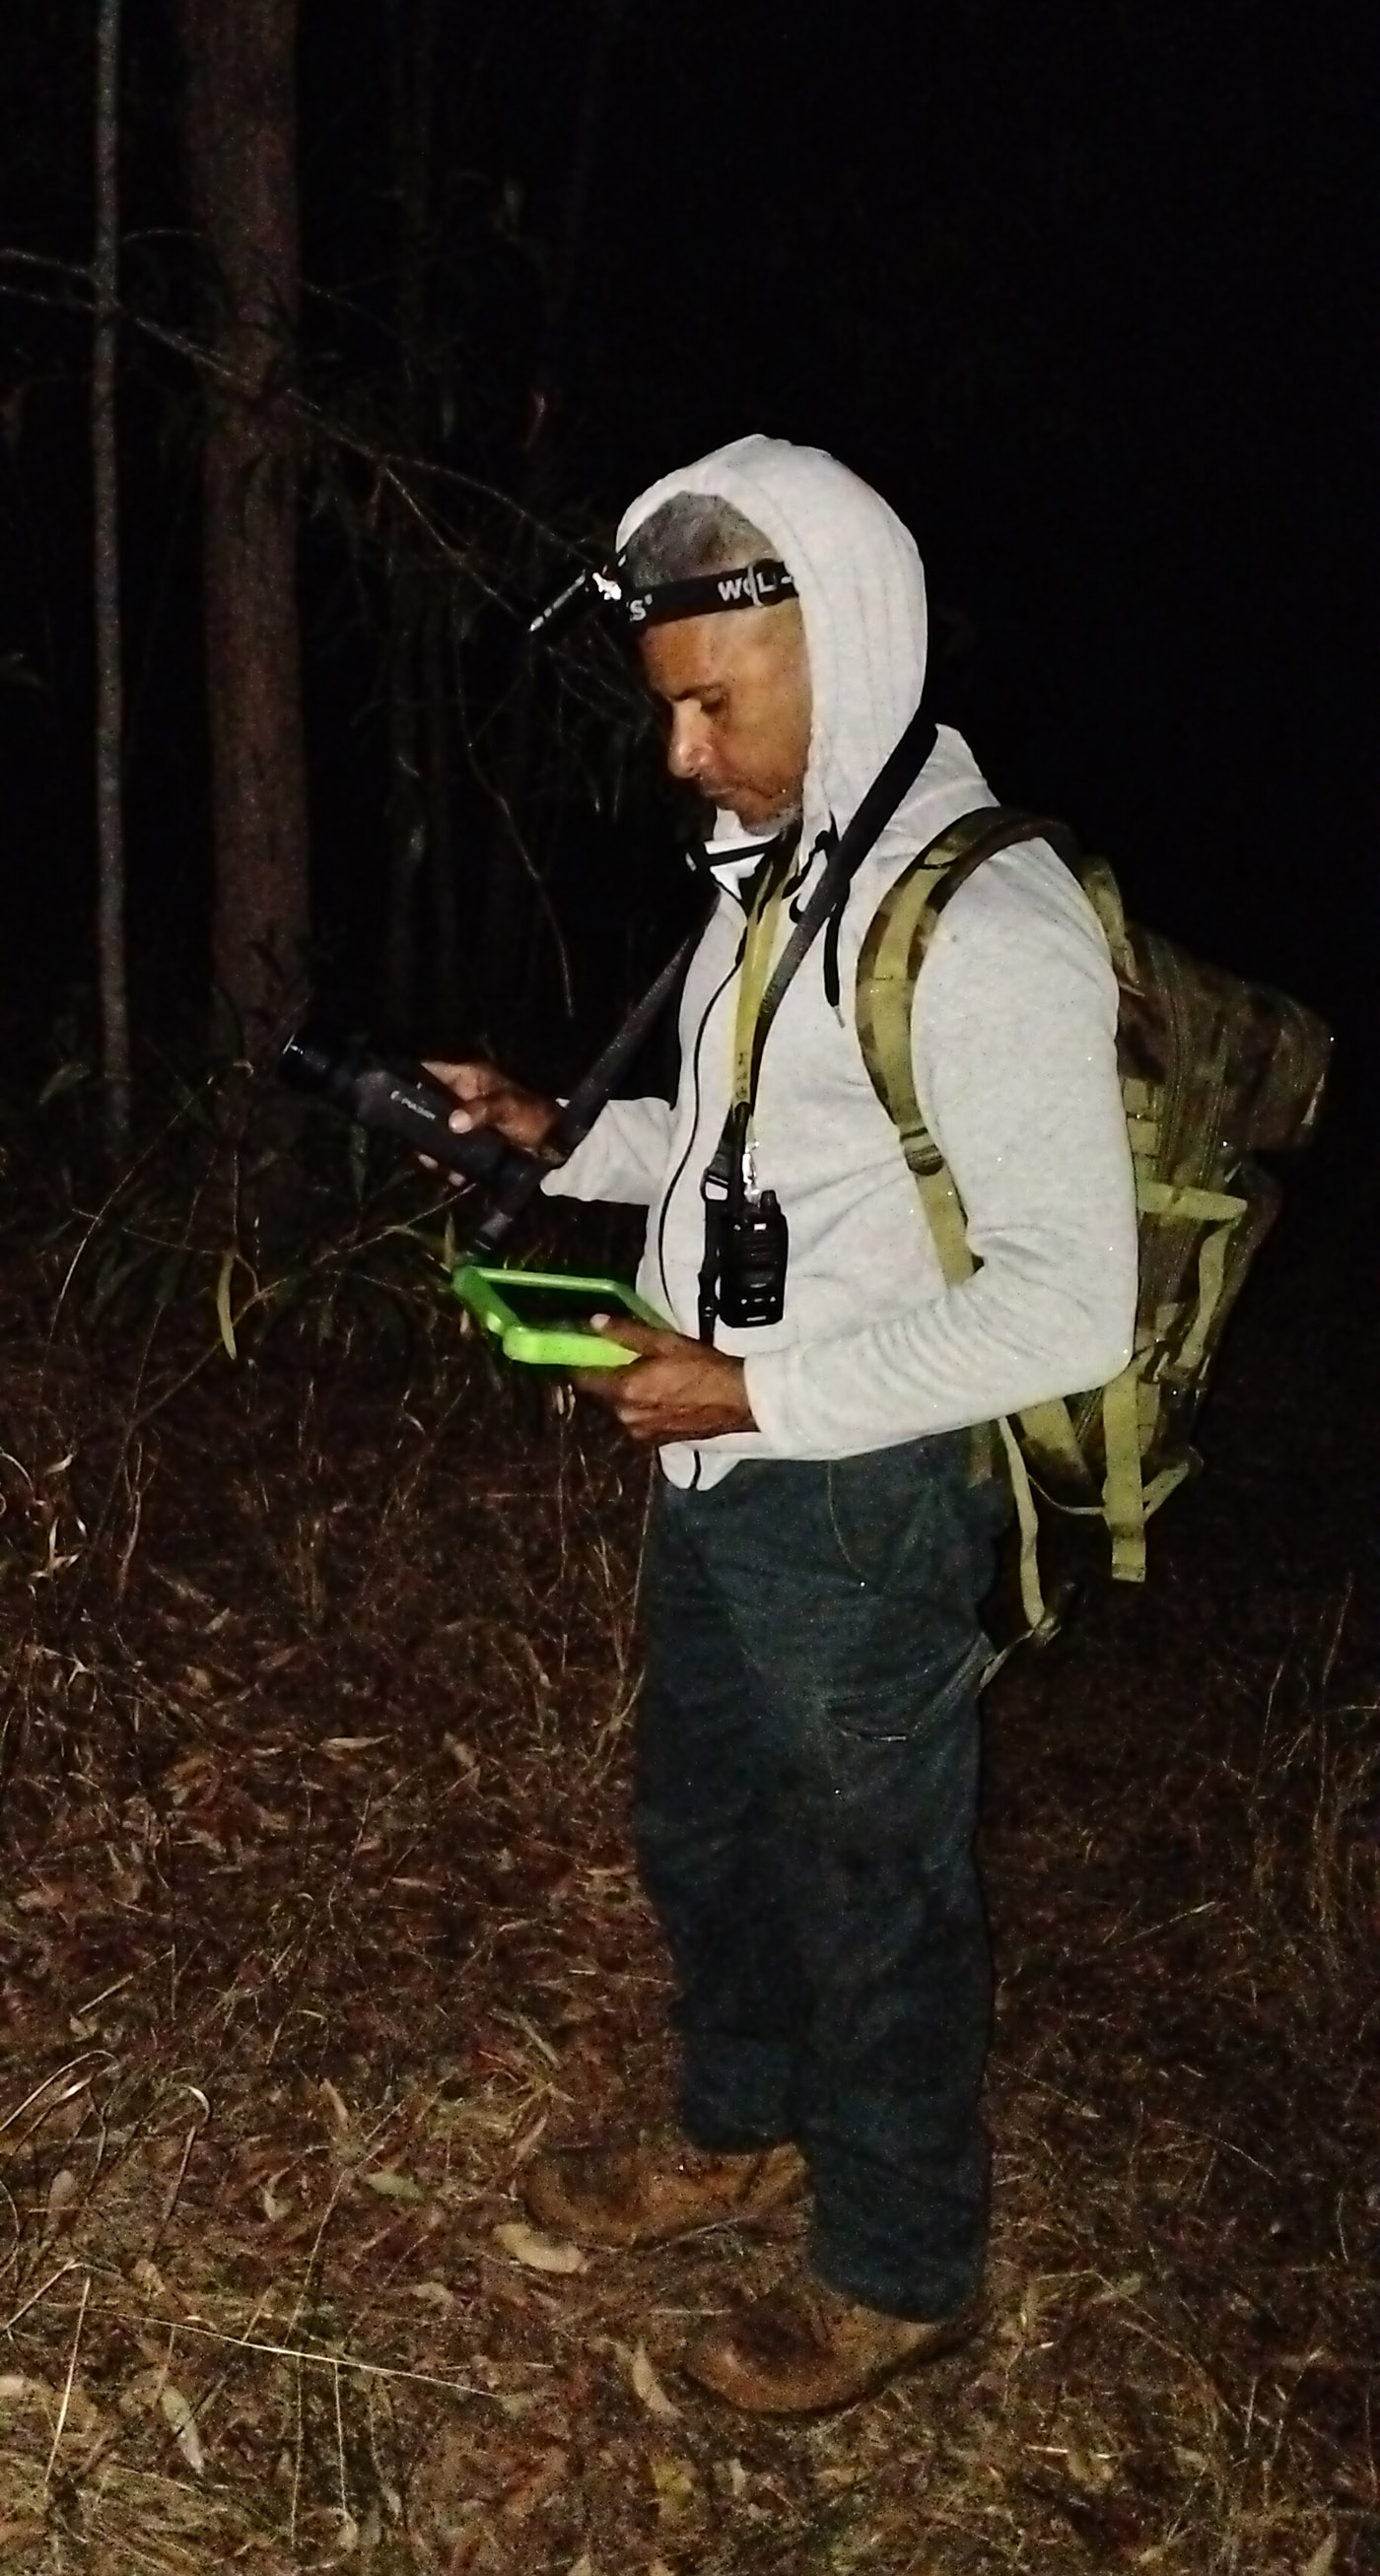 A man checks an iPad in a wooded area at night